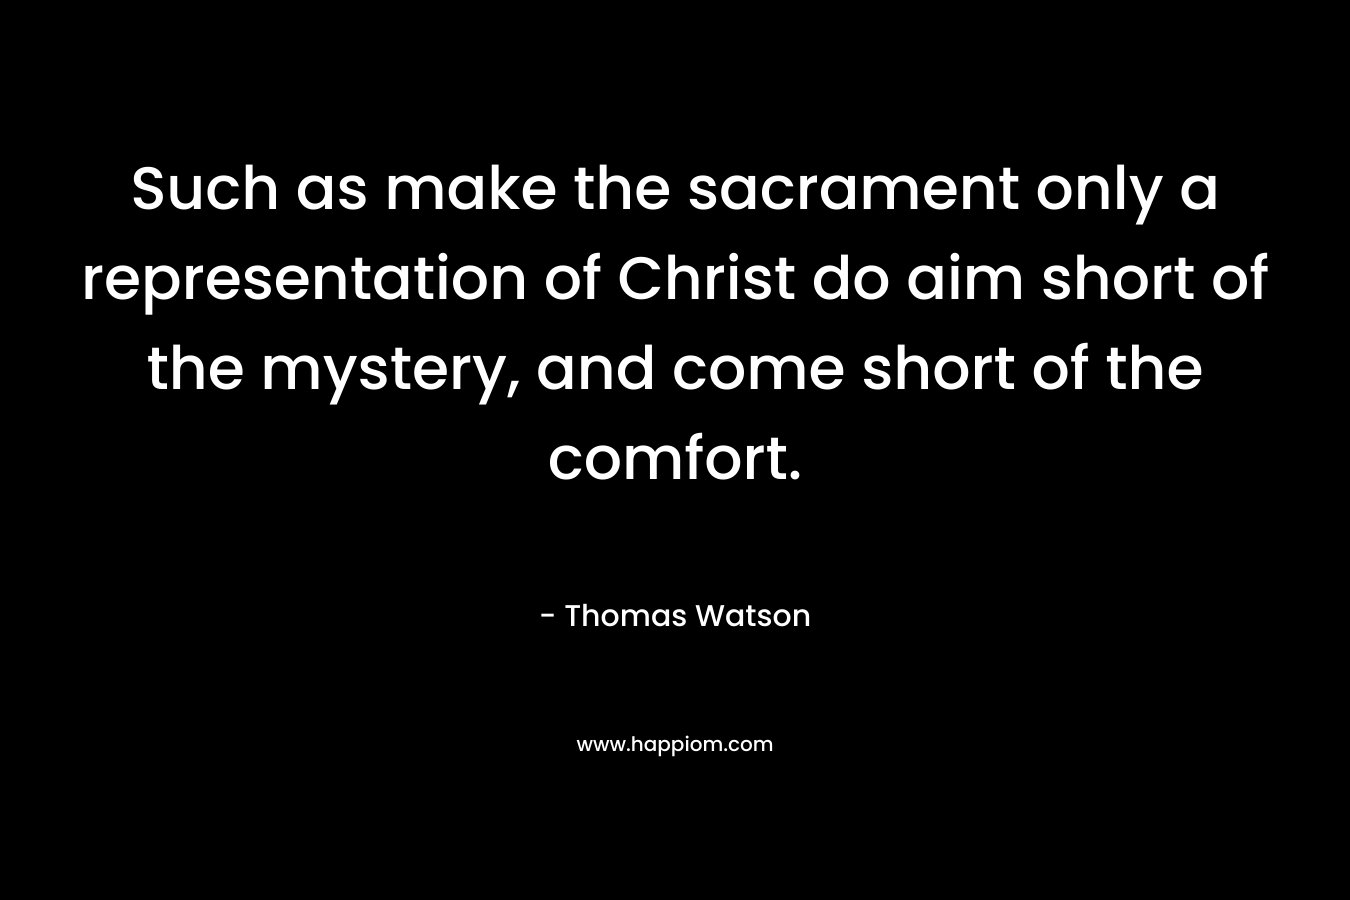 Such as make the sacrament only a representation of Christ do aim short of the mystery, and come short of the comfort.